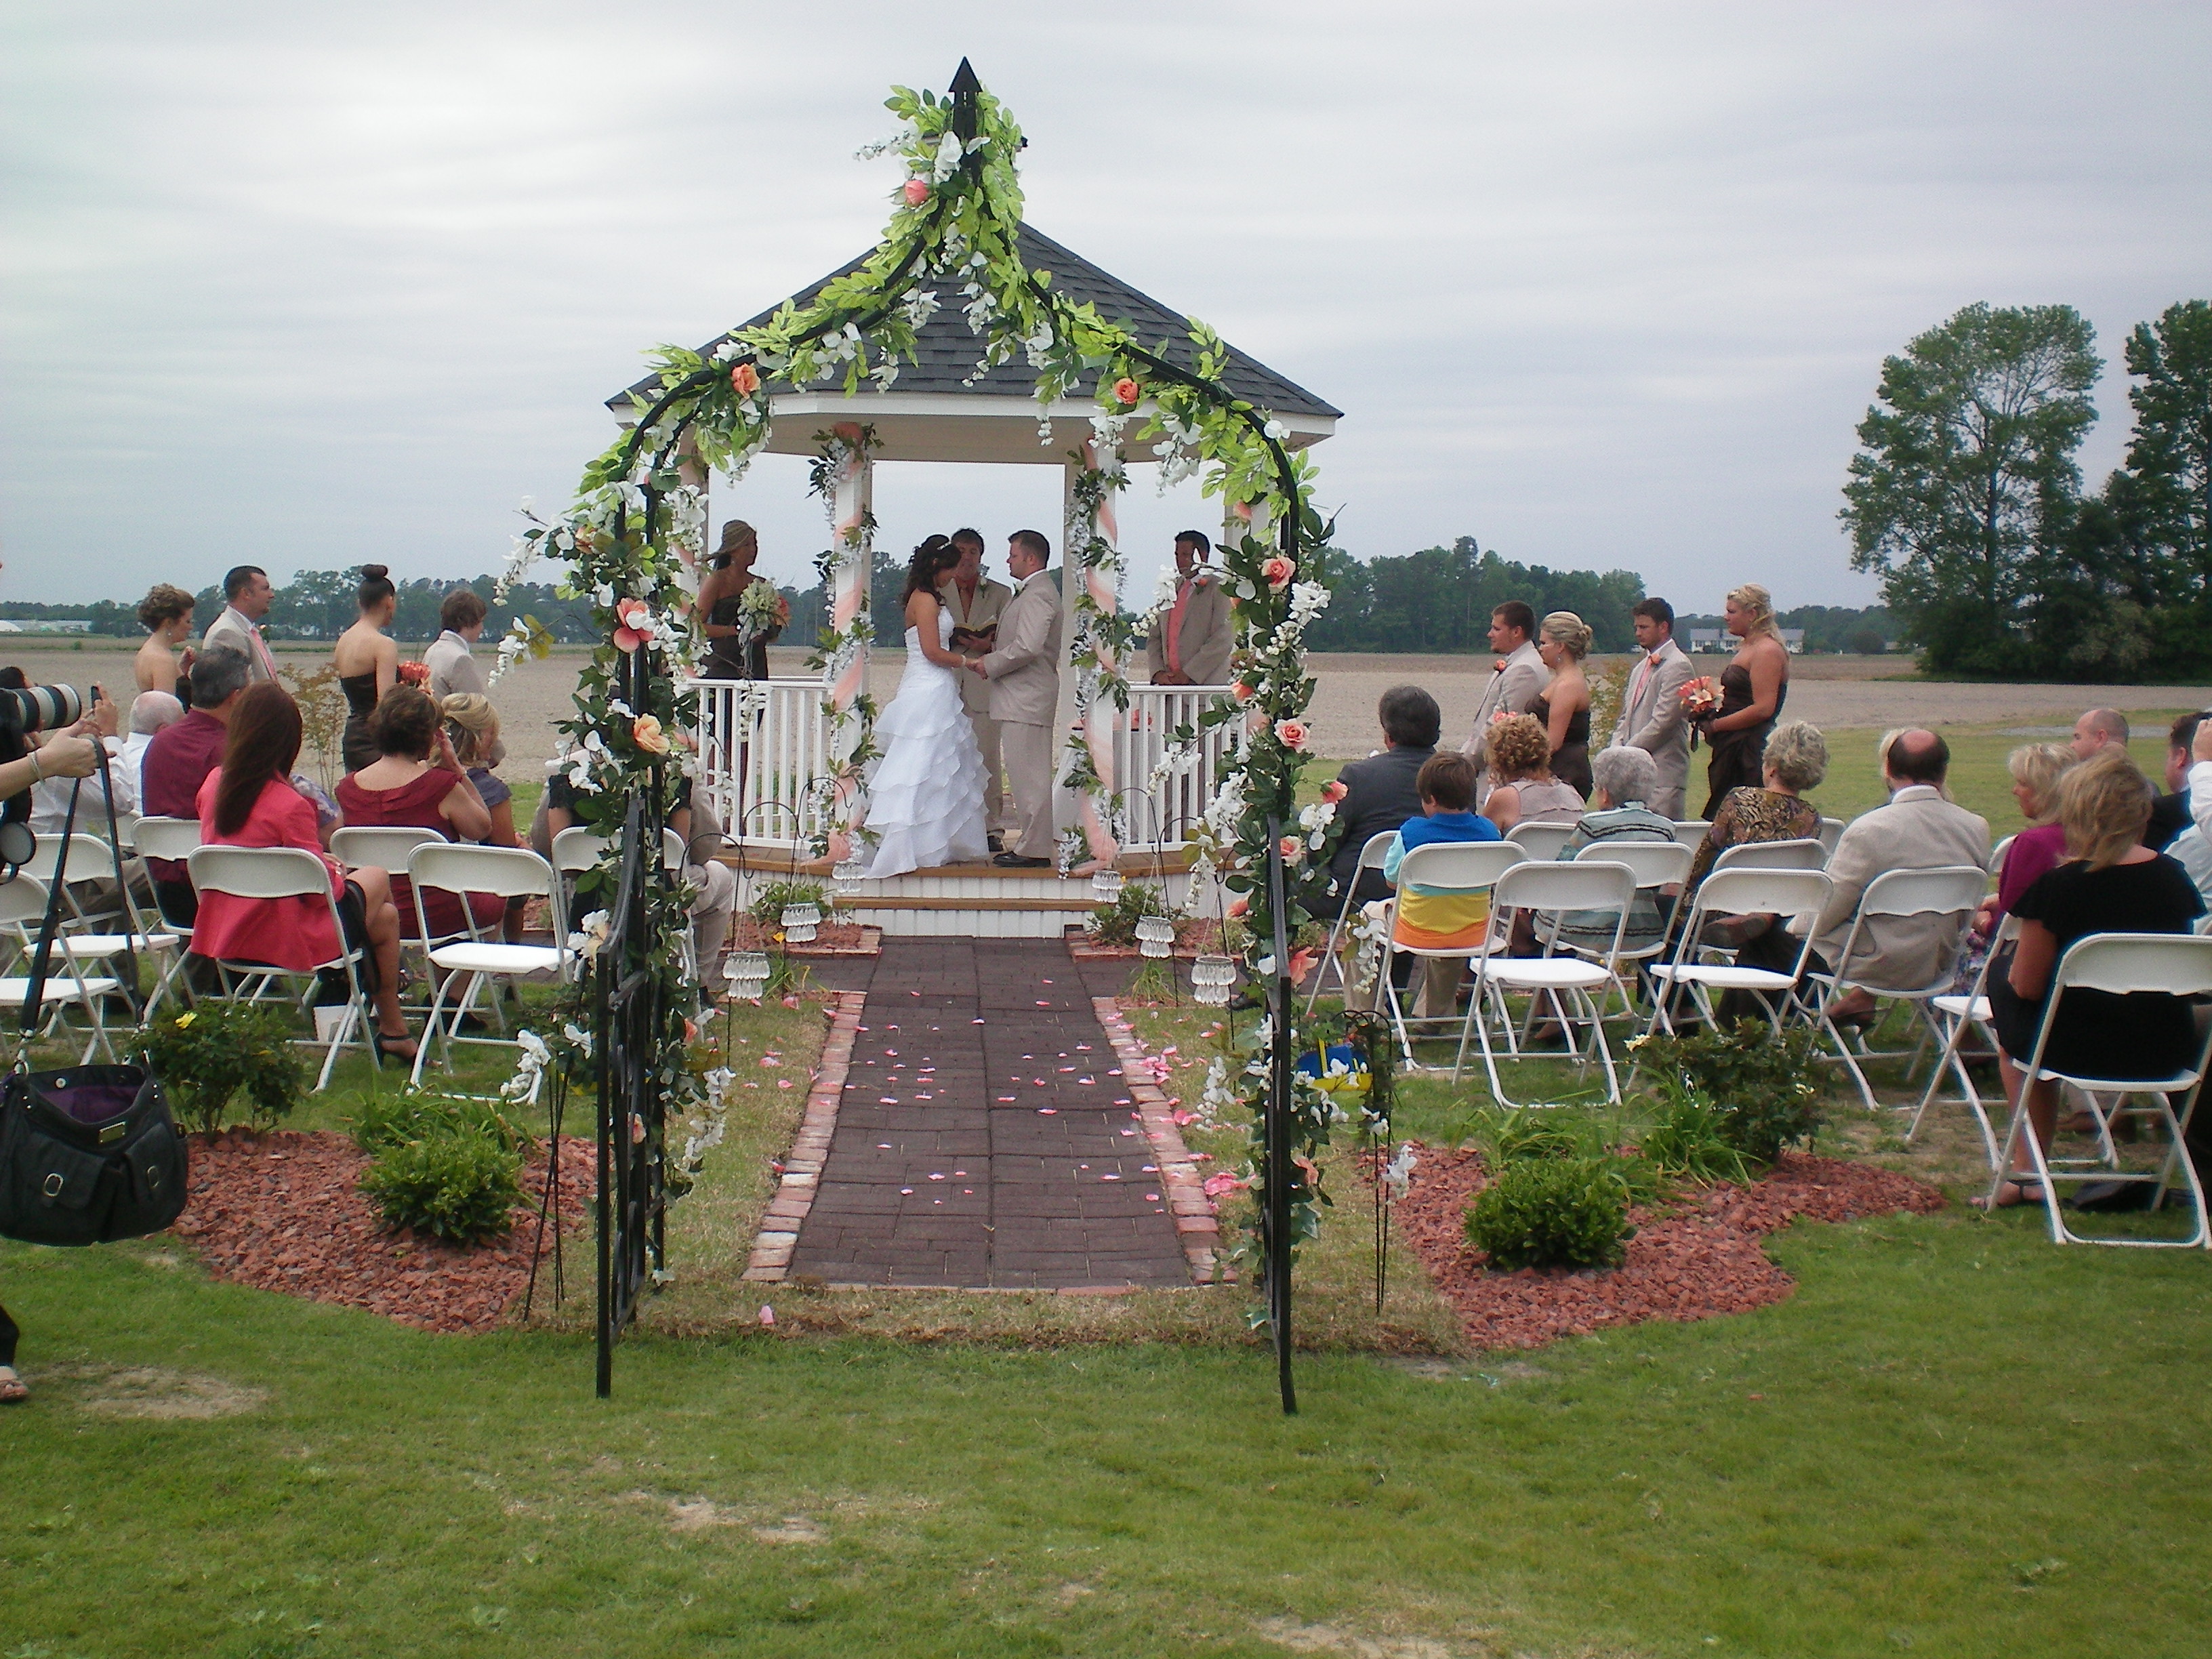 Brittany and Joseph got married in April 2012 at Hamstead Acres in LaGrange, NC